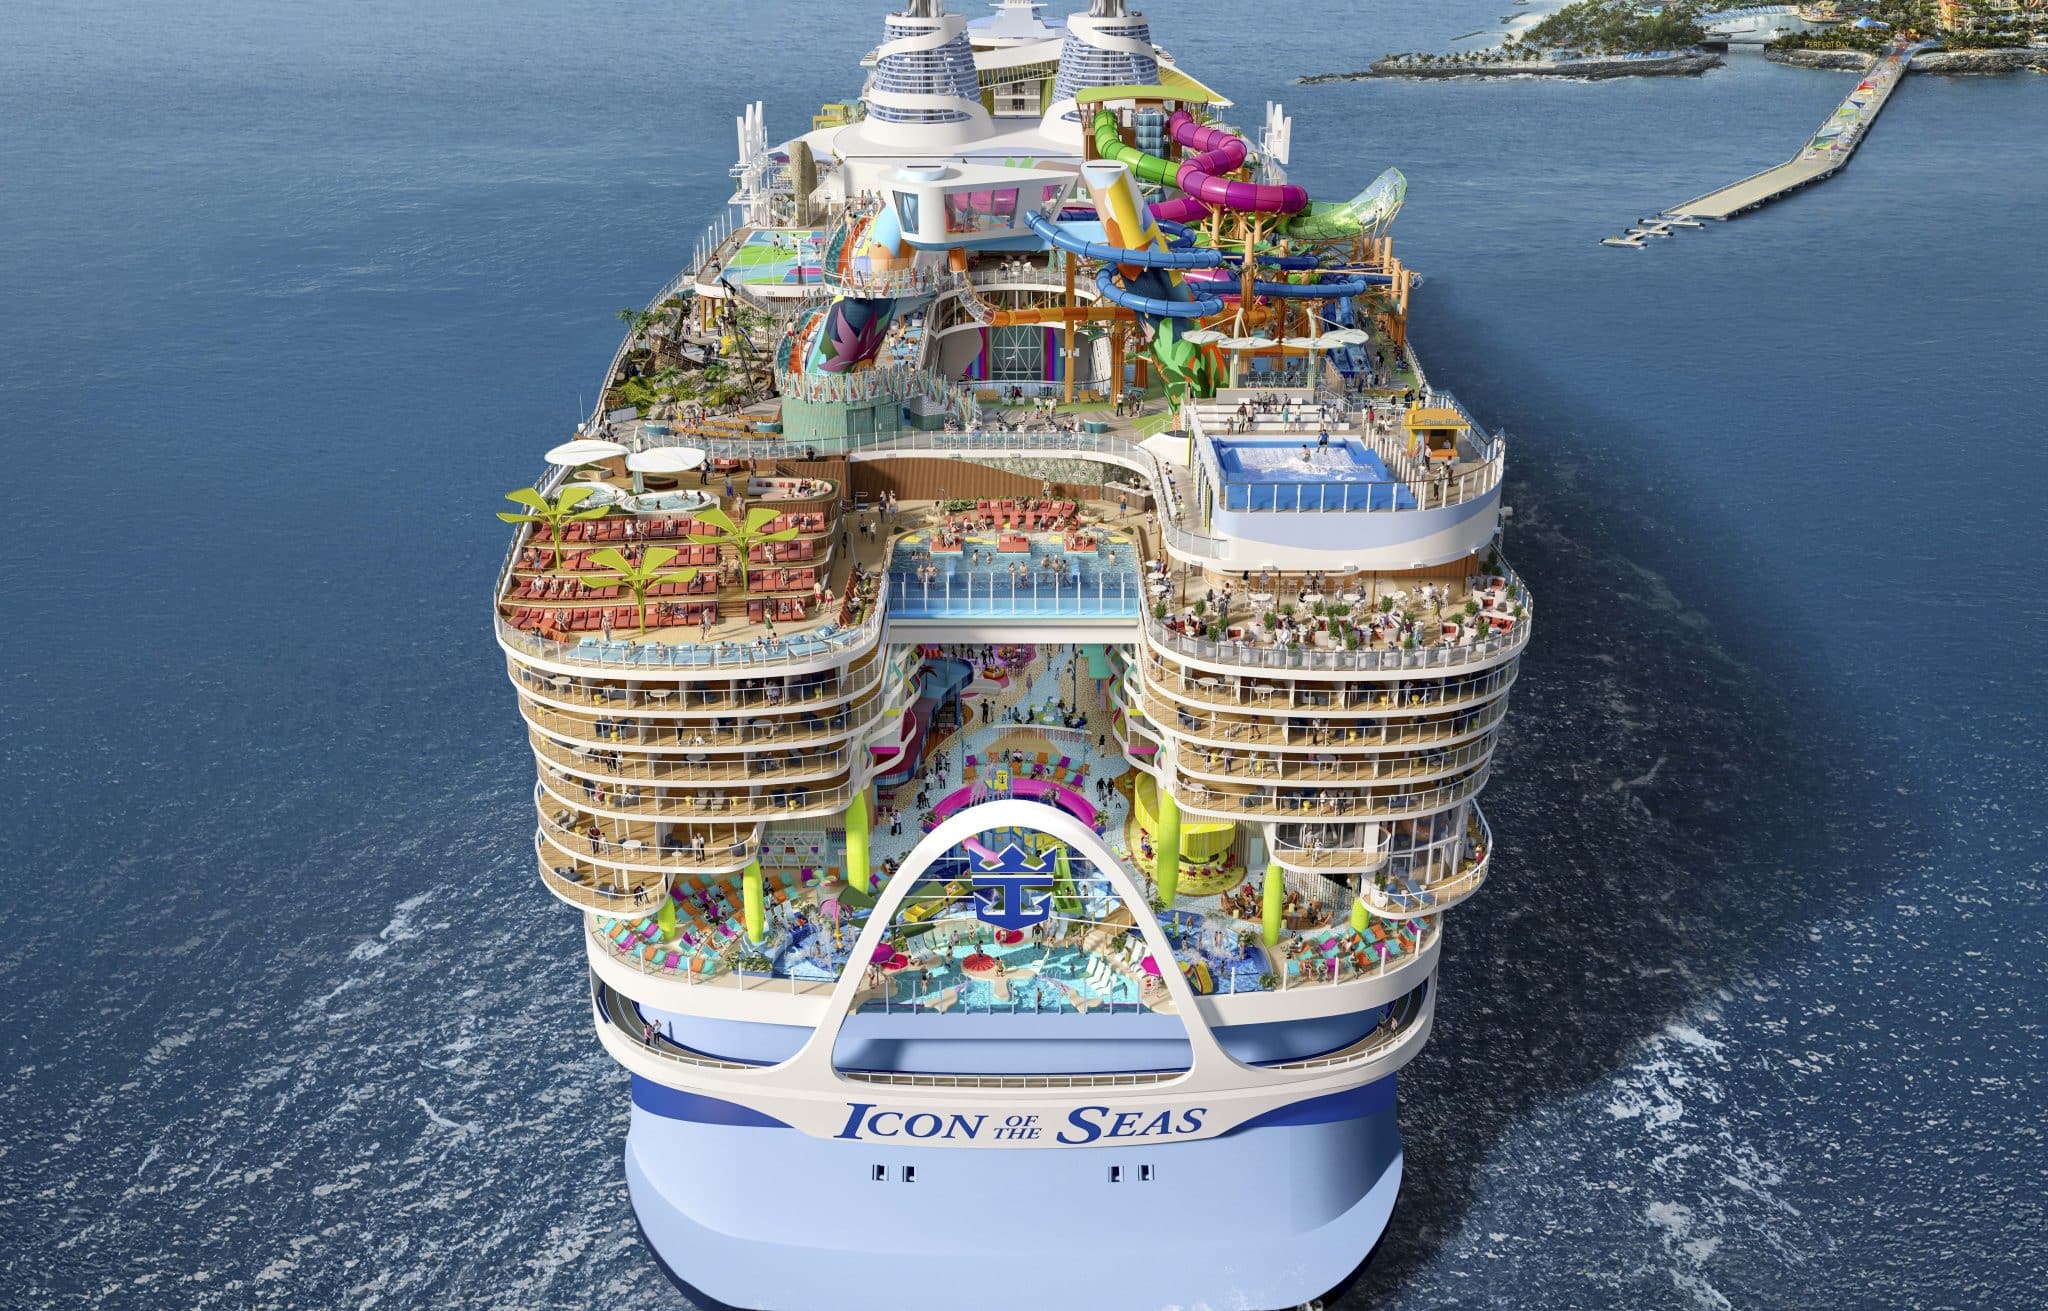 Royal Caribbean's Icon of the Seas, the largest cruise ship ever built